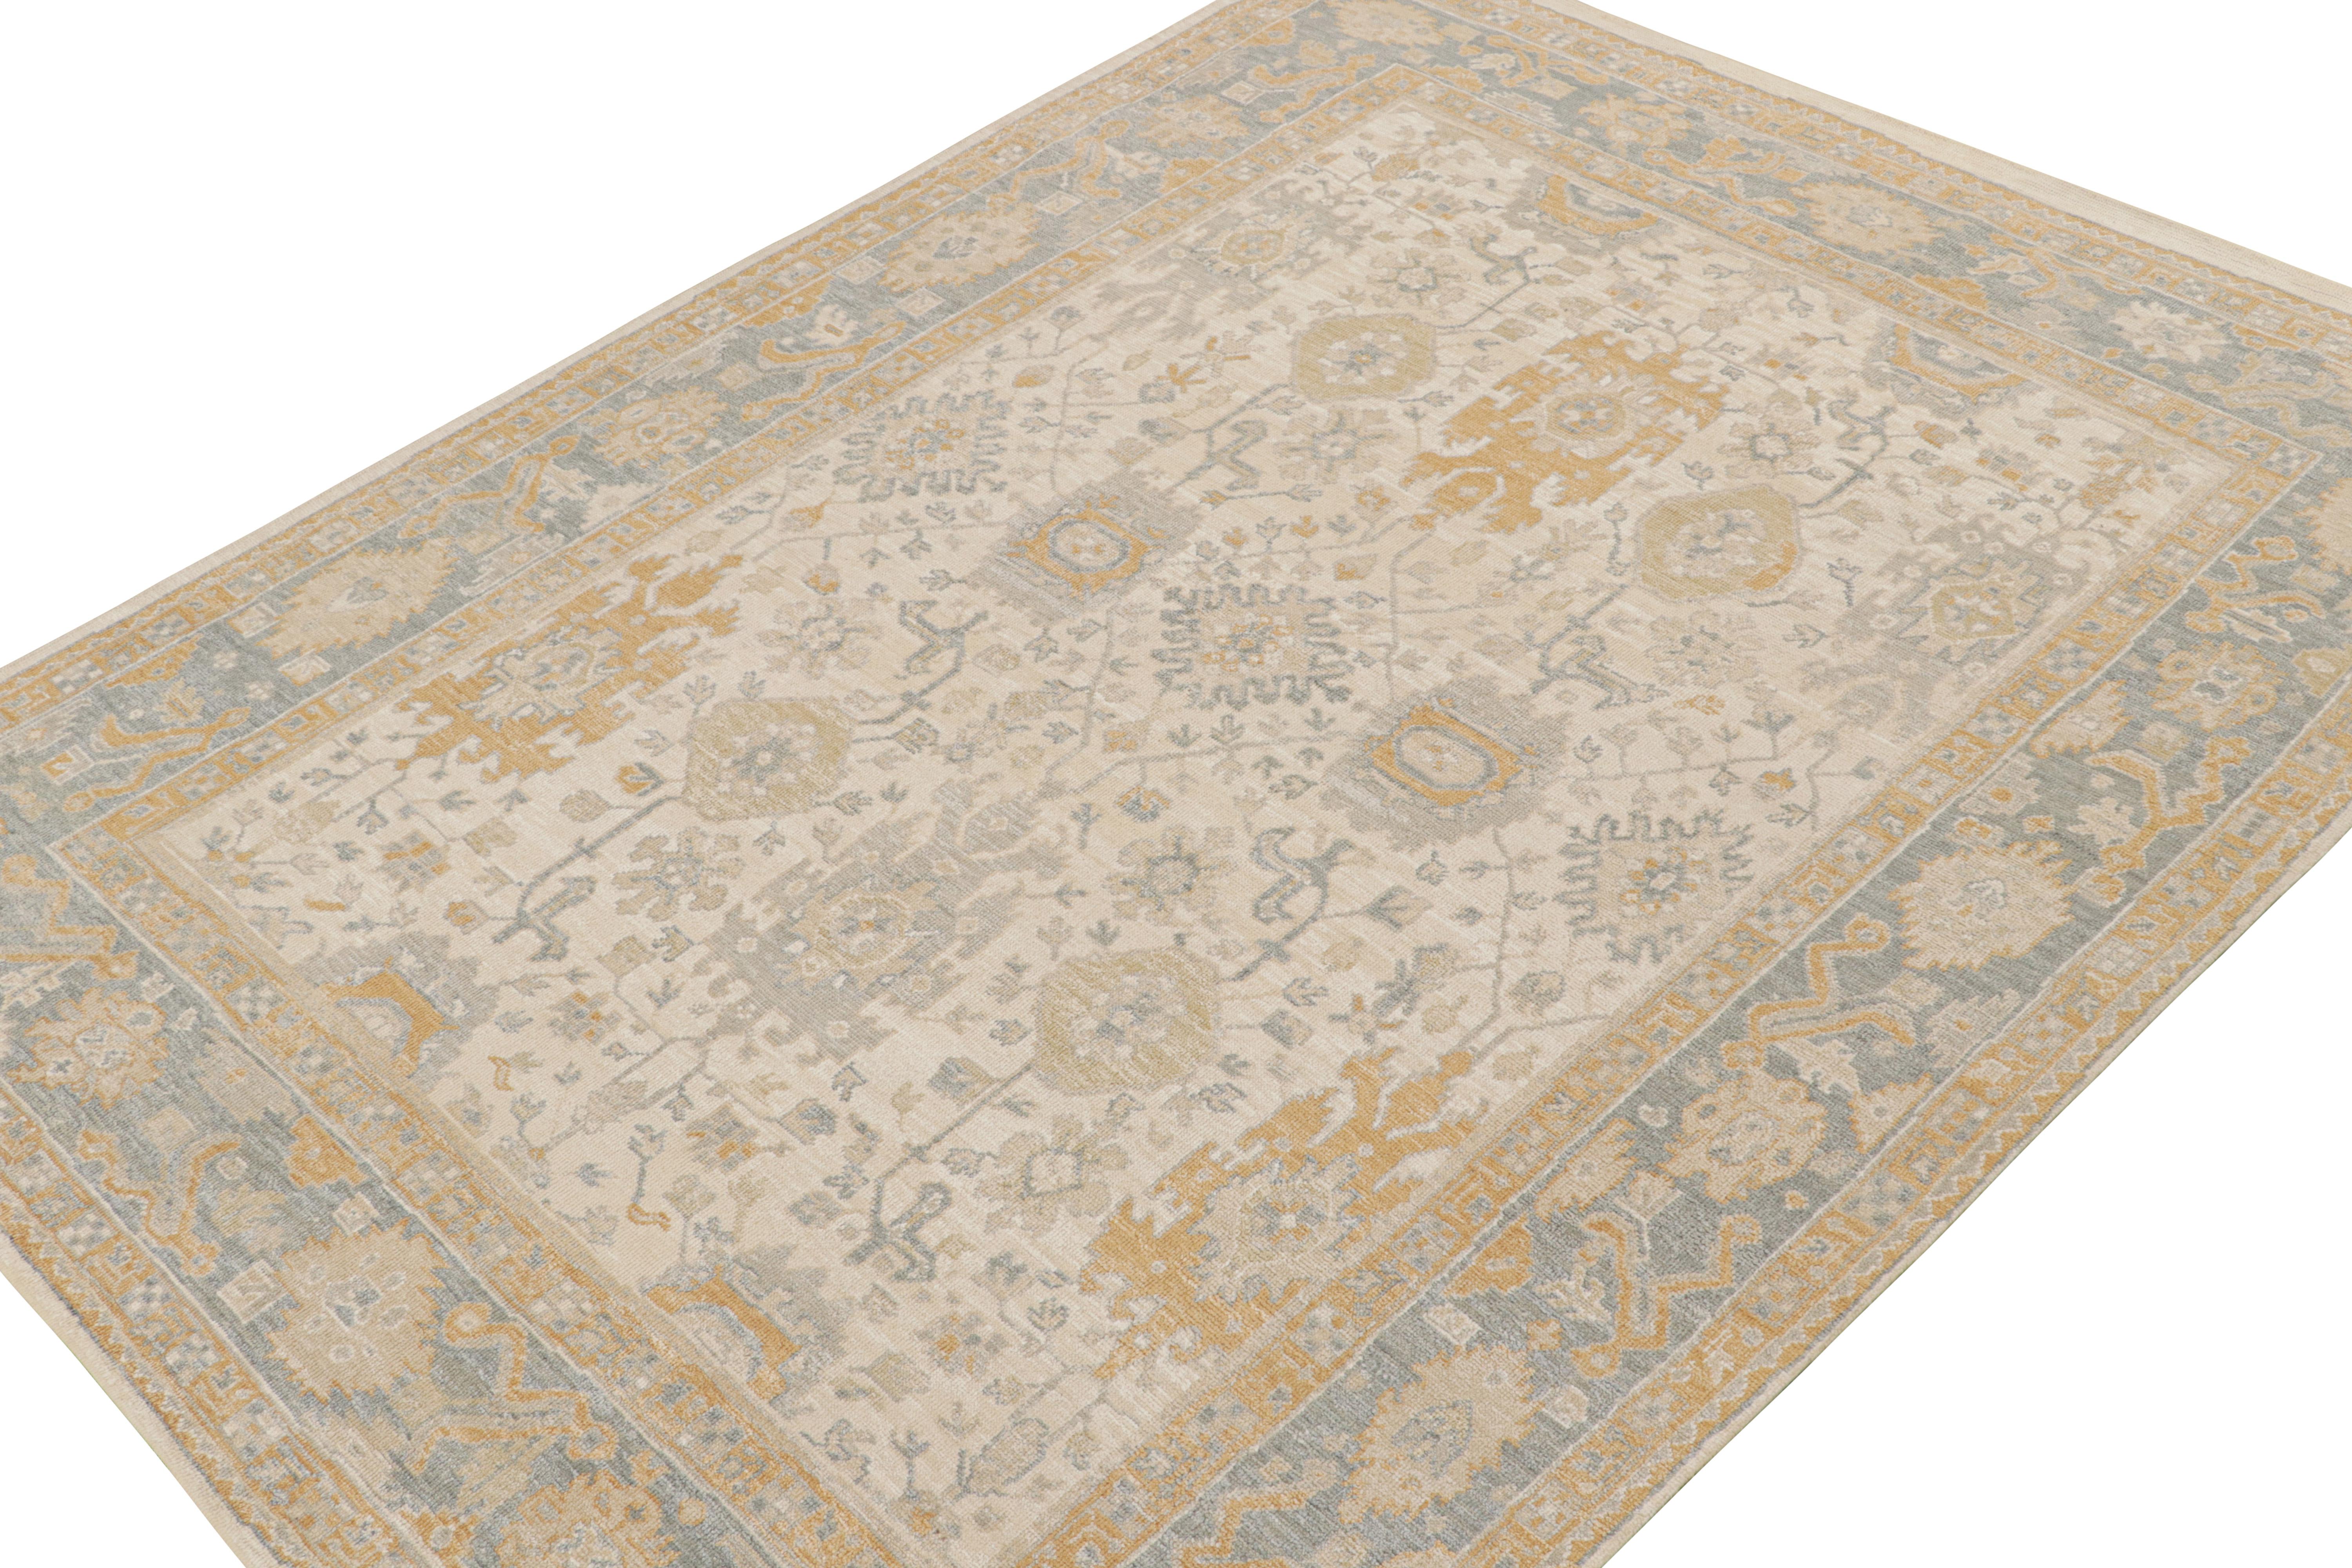 This 9x12 rug from the Modern Classics Collection by Rug & Kilim is from a new line inspired by antique Oushak rugs. Hand-knotted in silk, its design enjoys floral patterns with beige-brown, light gold and ice blue tones.

On the Design: 

The rug